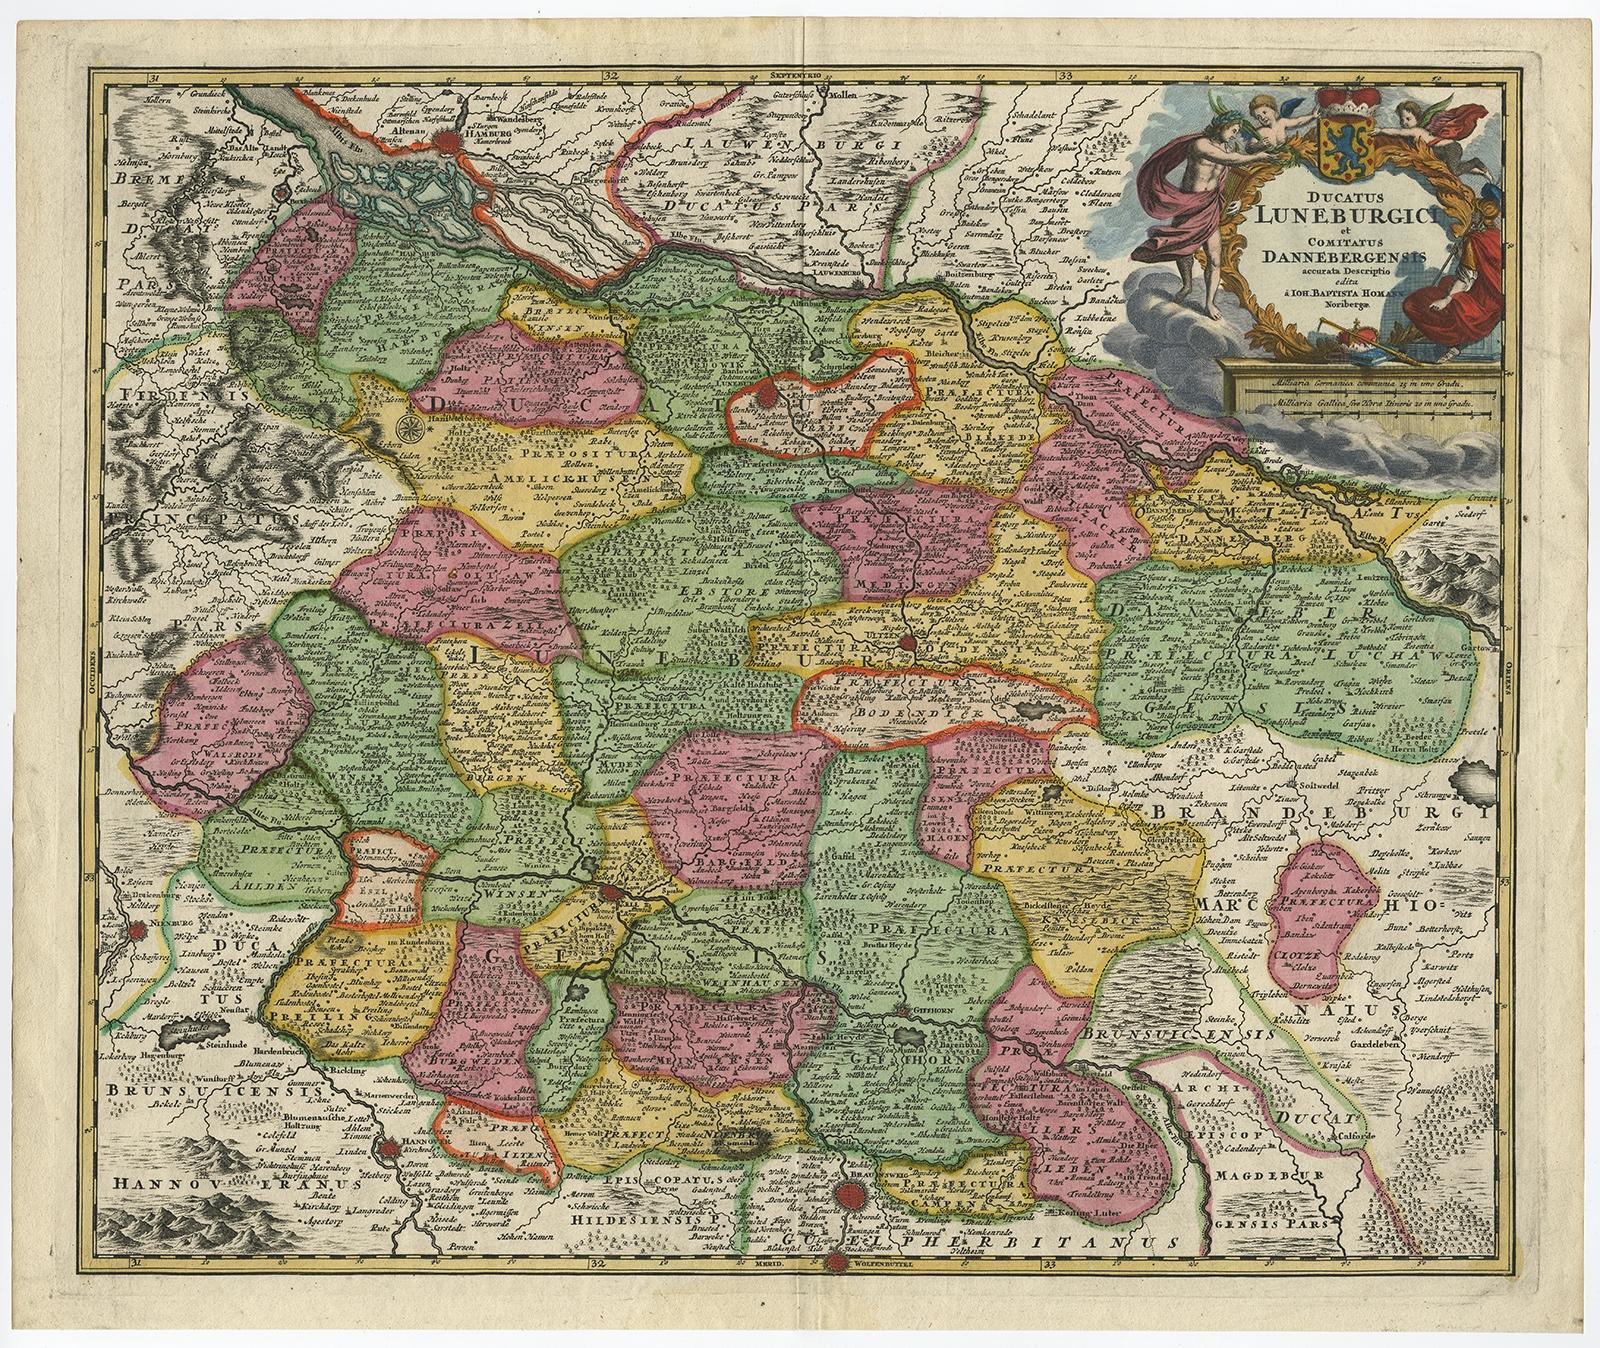 Antique map titled 'Ducatus Luneburgici et Comitatus Dannebergensis accurata Descriptio.' 

This detailed regional map includes Hamburg, Luneberg, and as far south as Hannover, Braunsweig. The Aller and Elbe Rivers cut across the area. Fortified